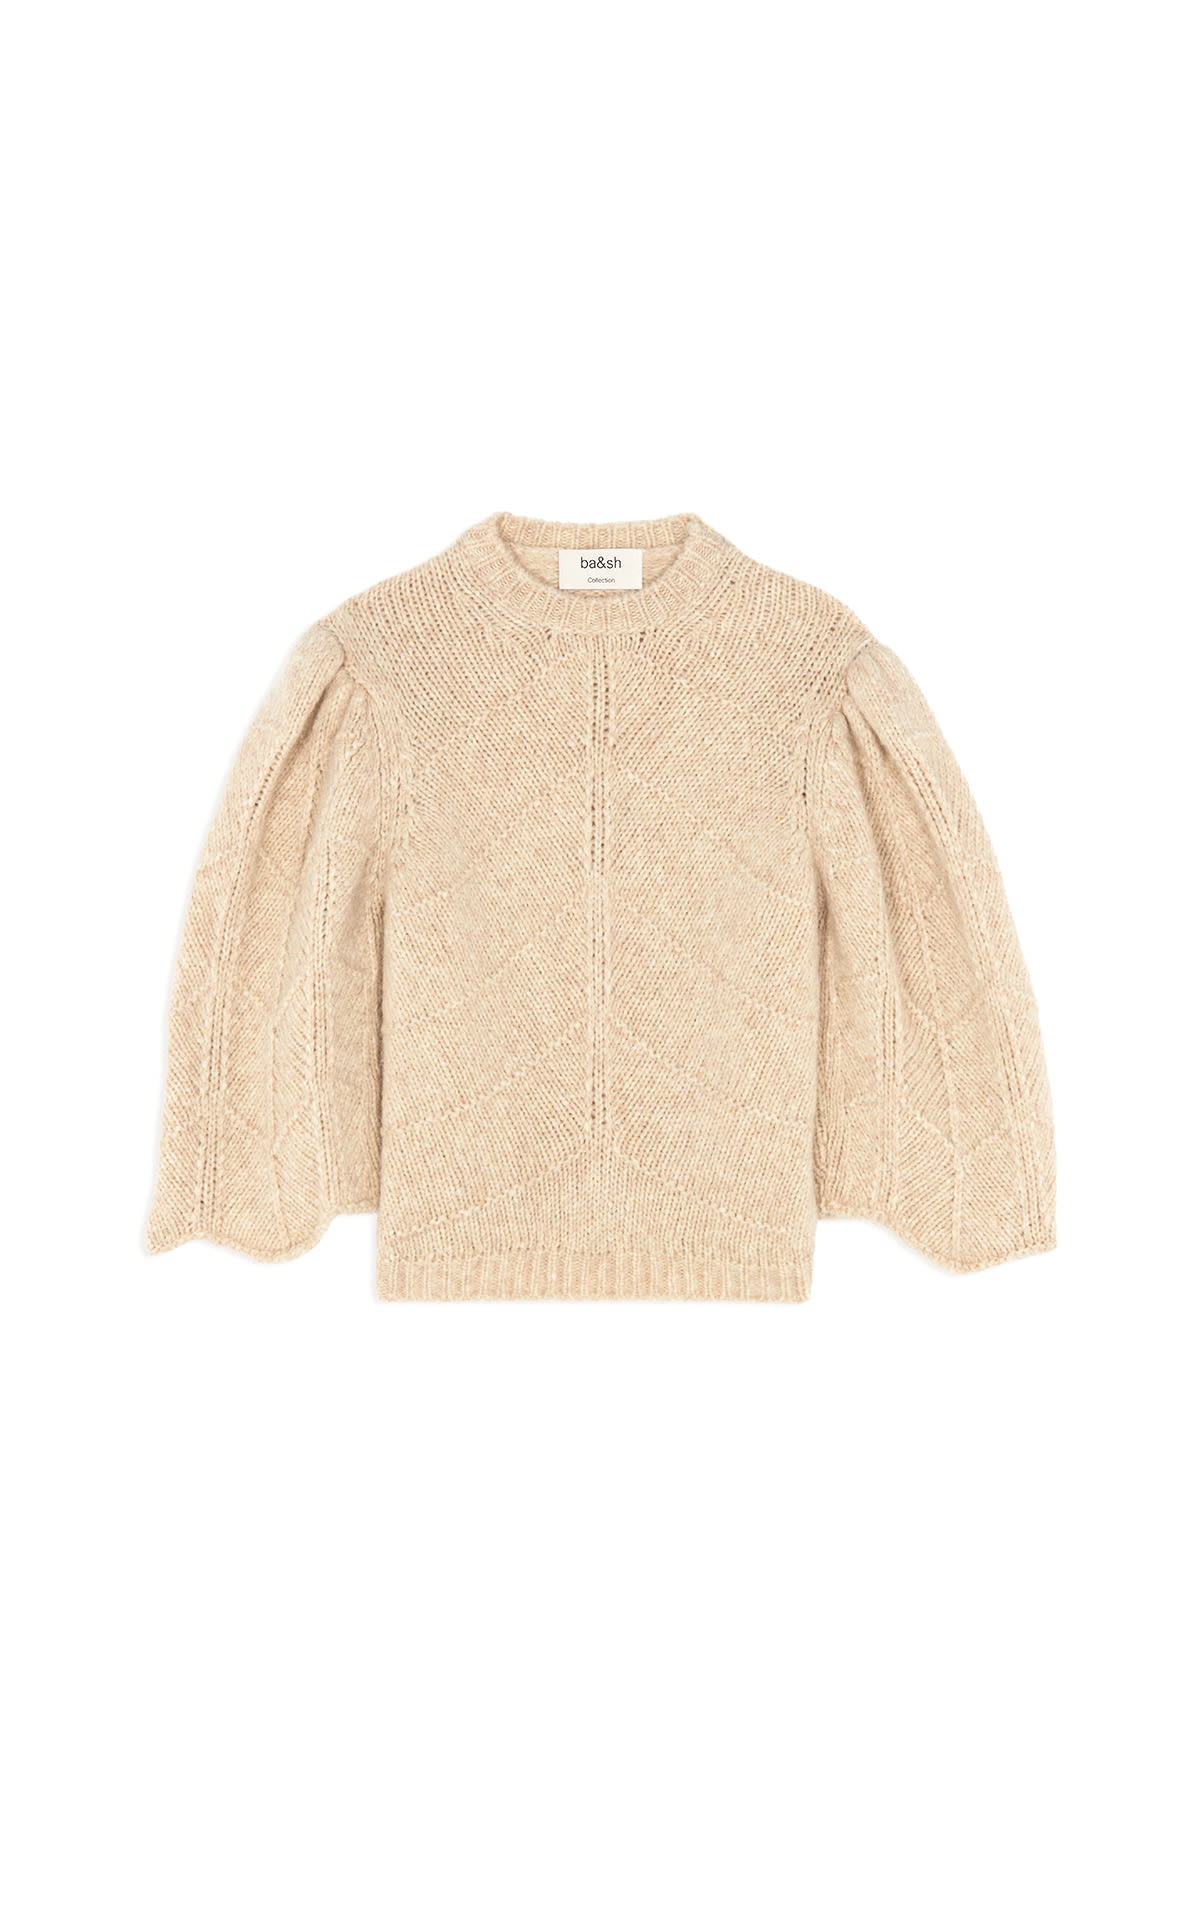 Cream-colored jumper with baggy sleeves ba&sh